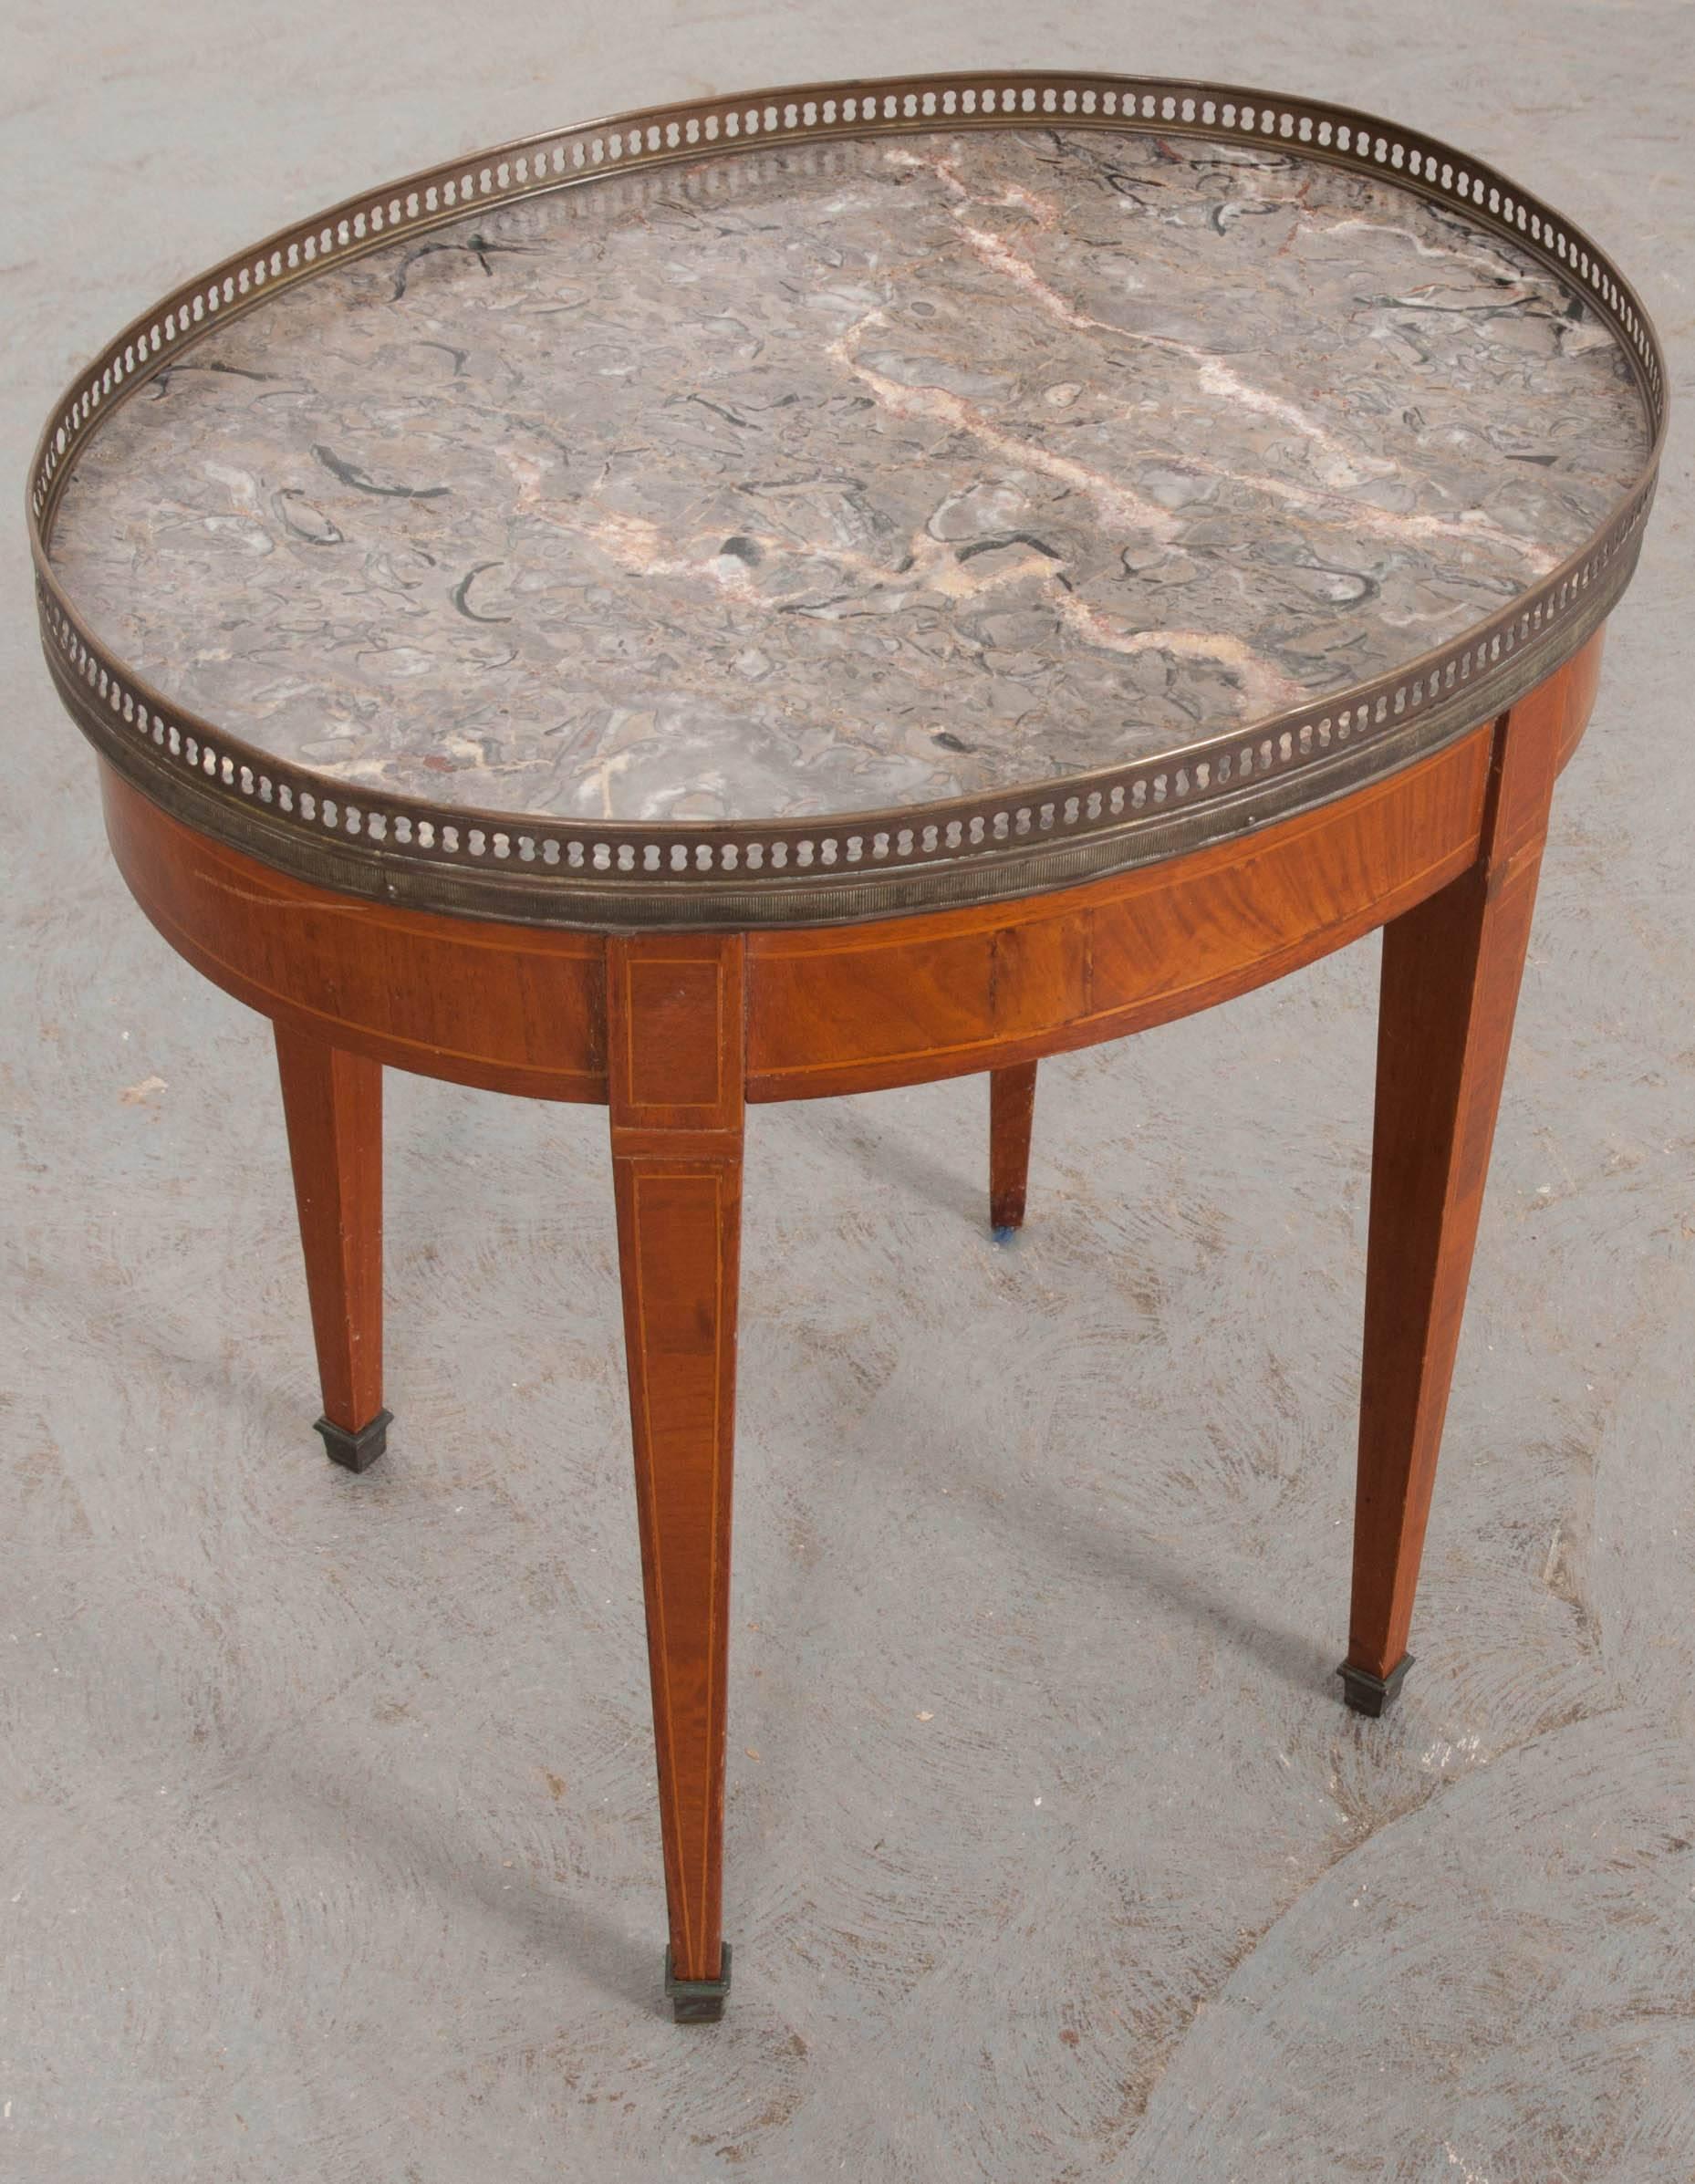 A lovely little mahogany table, oval in shape, from 19th century, France. The table has a gray marble top which is surrounded by a pierced brass gallery. It is made in the Directoire style, with straight, tapered legs that extend from the front of